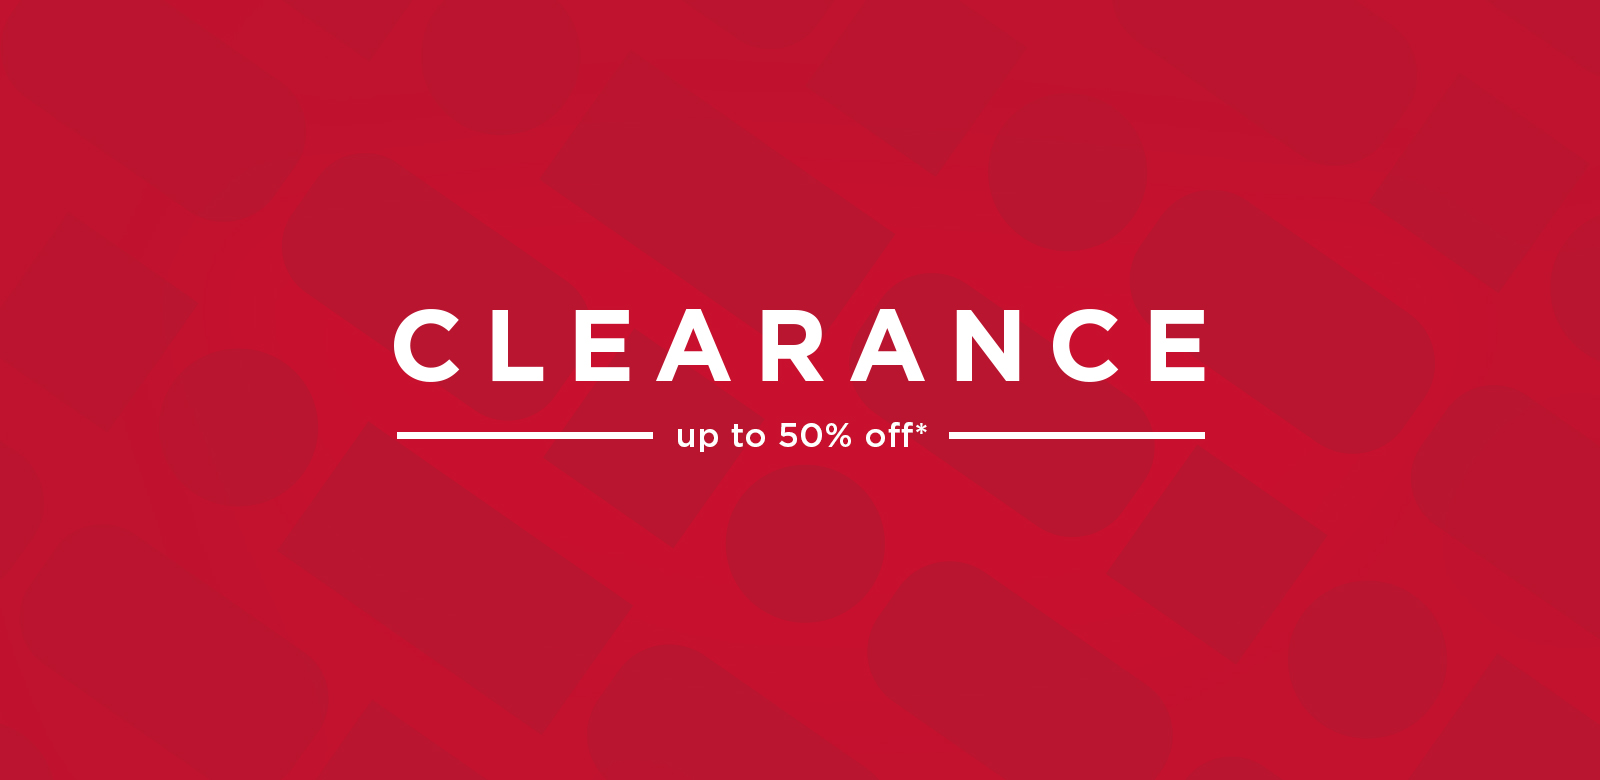 Clearance, up to 50% off.